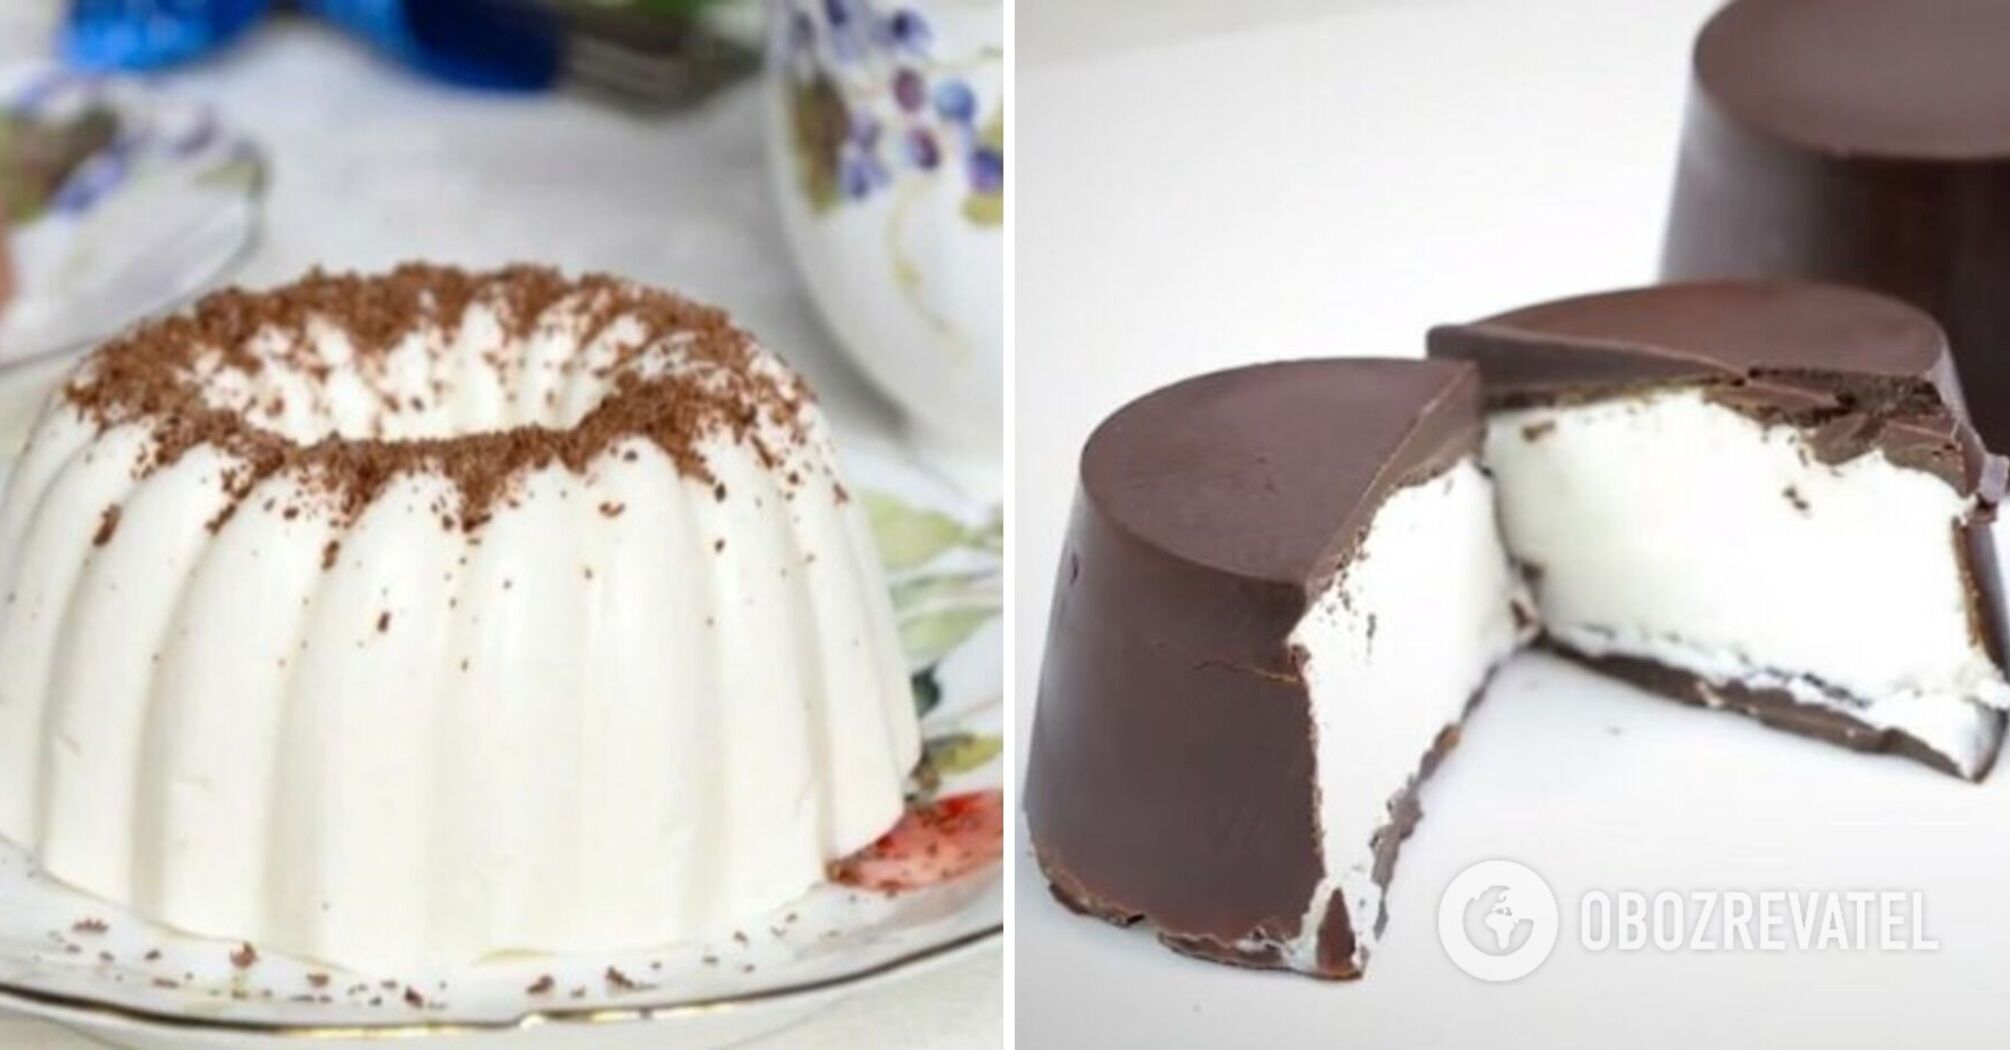 A low-calorie dessert without flour and baking that can be eaten overnight